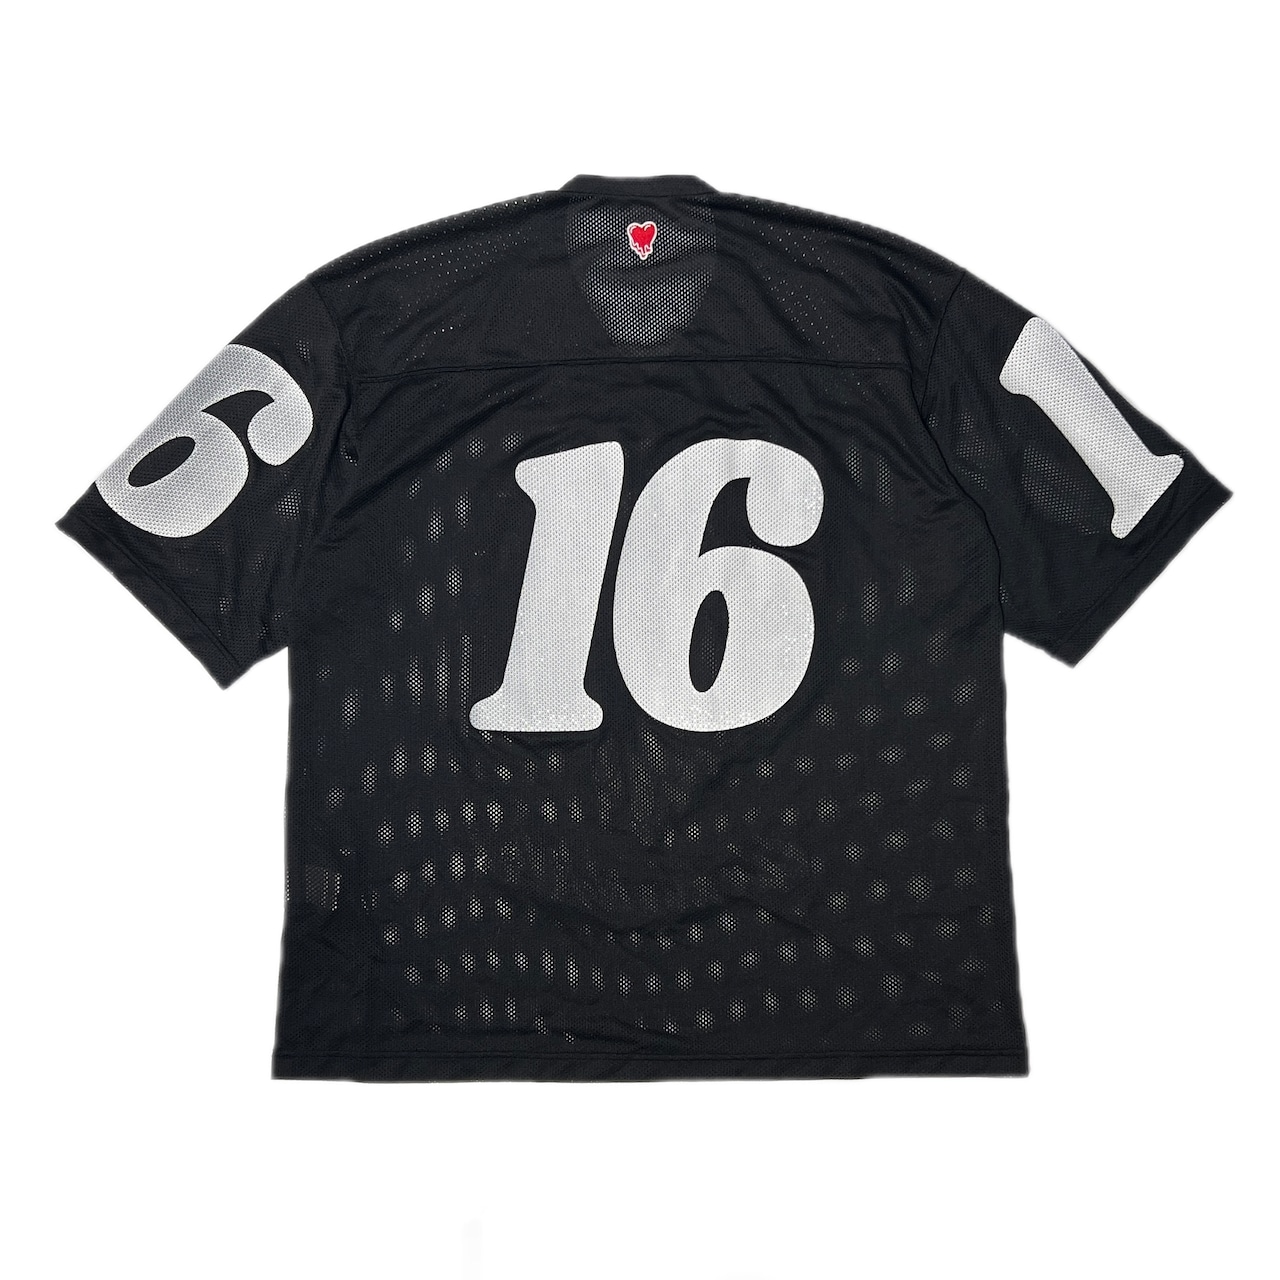 EMOTIONALLY UNAVAILABLE / FOOTBALL JERSEY